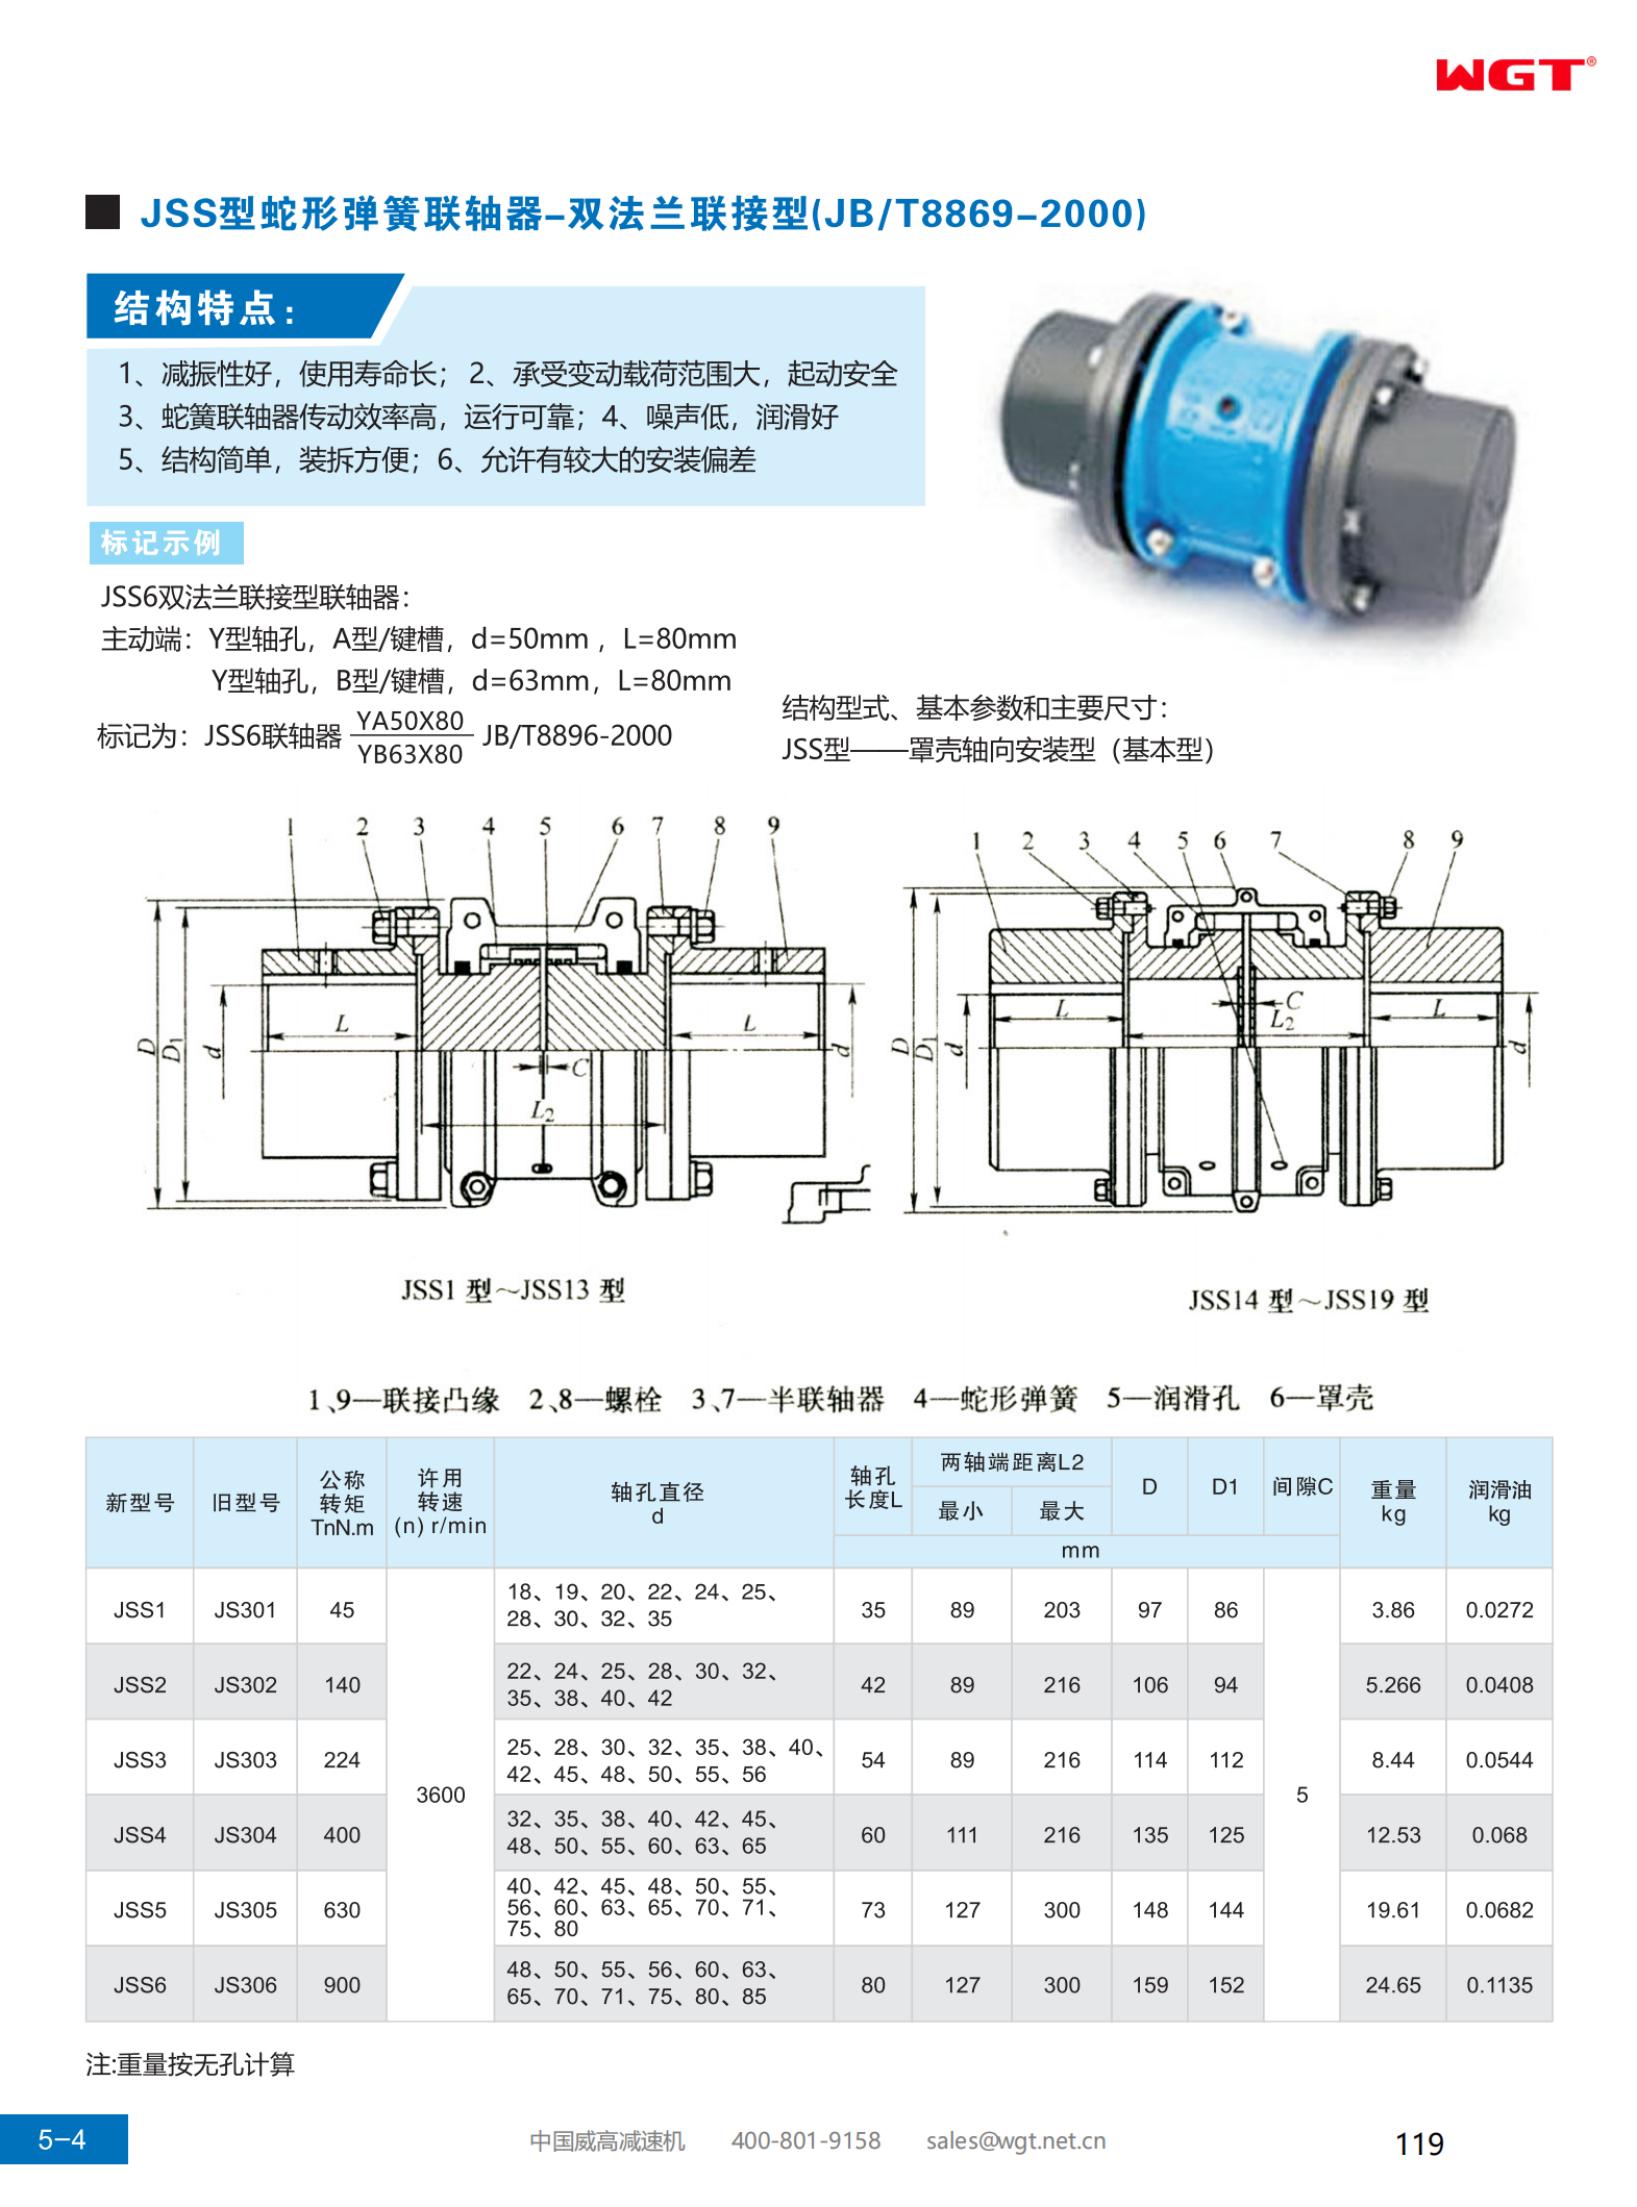 JSS type serpentine spring coupling - double flange connection type (JB/T8869-2000)